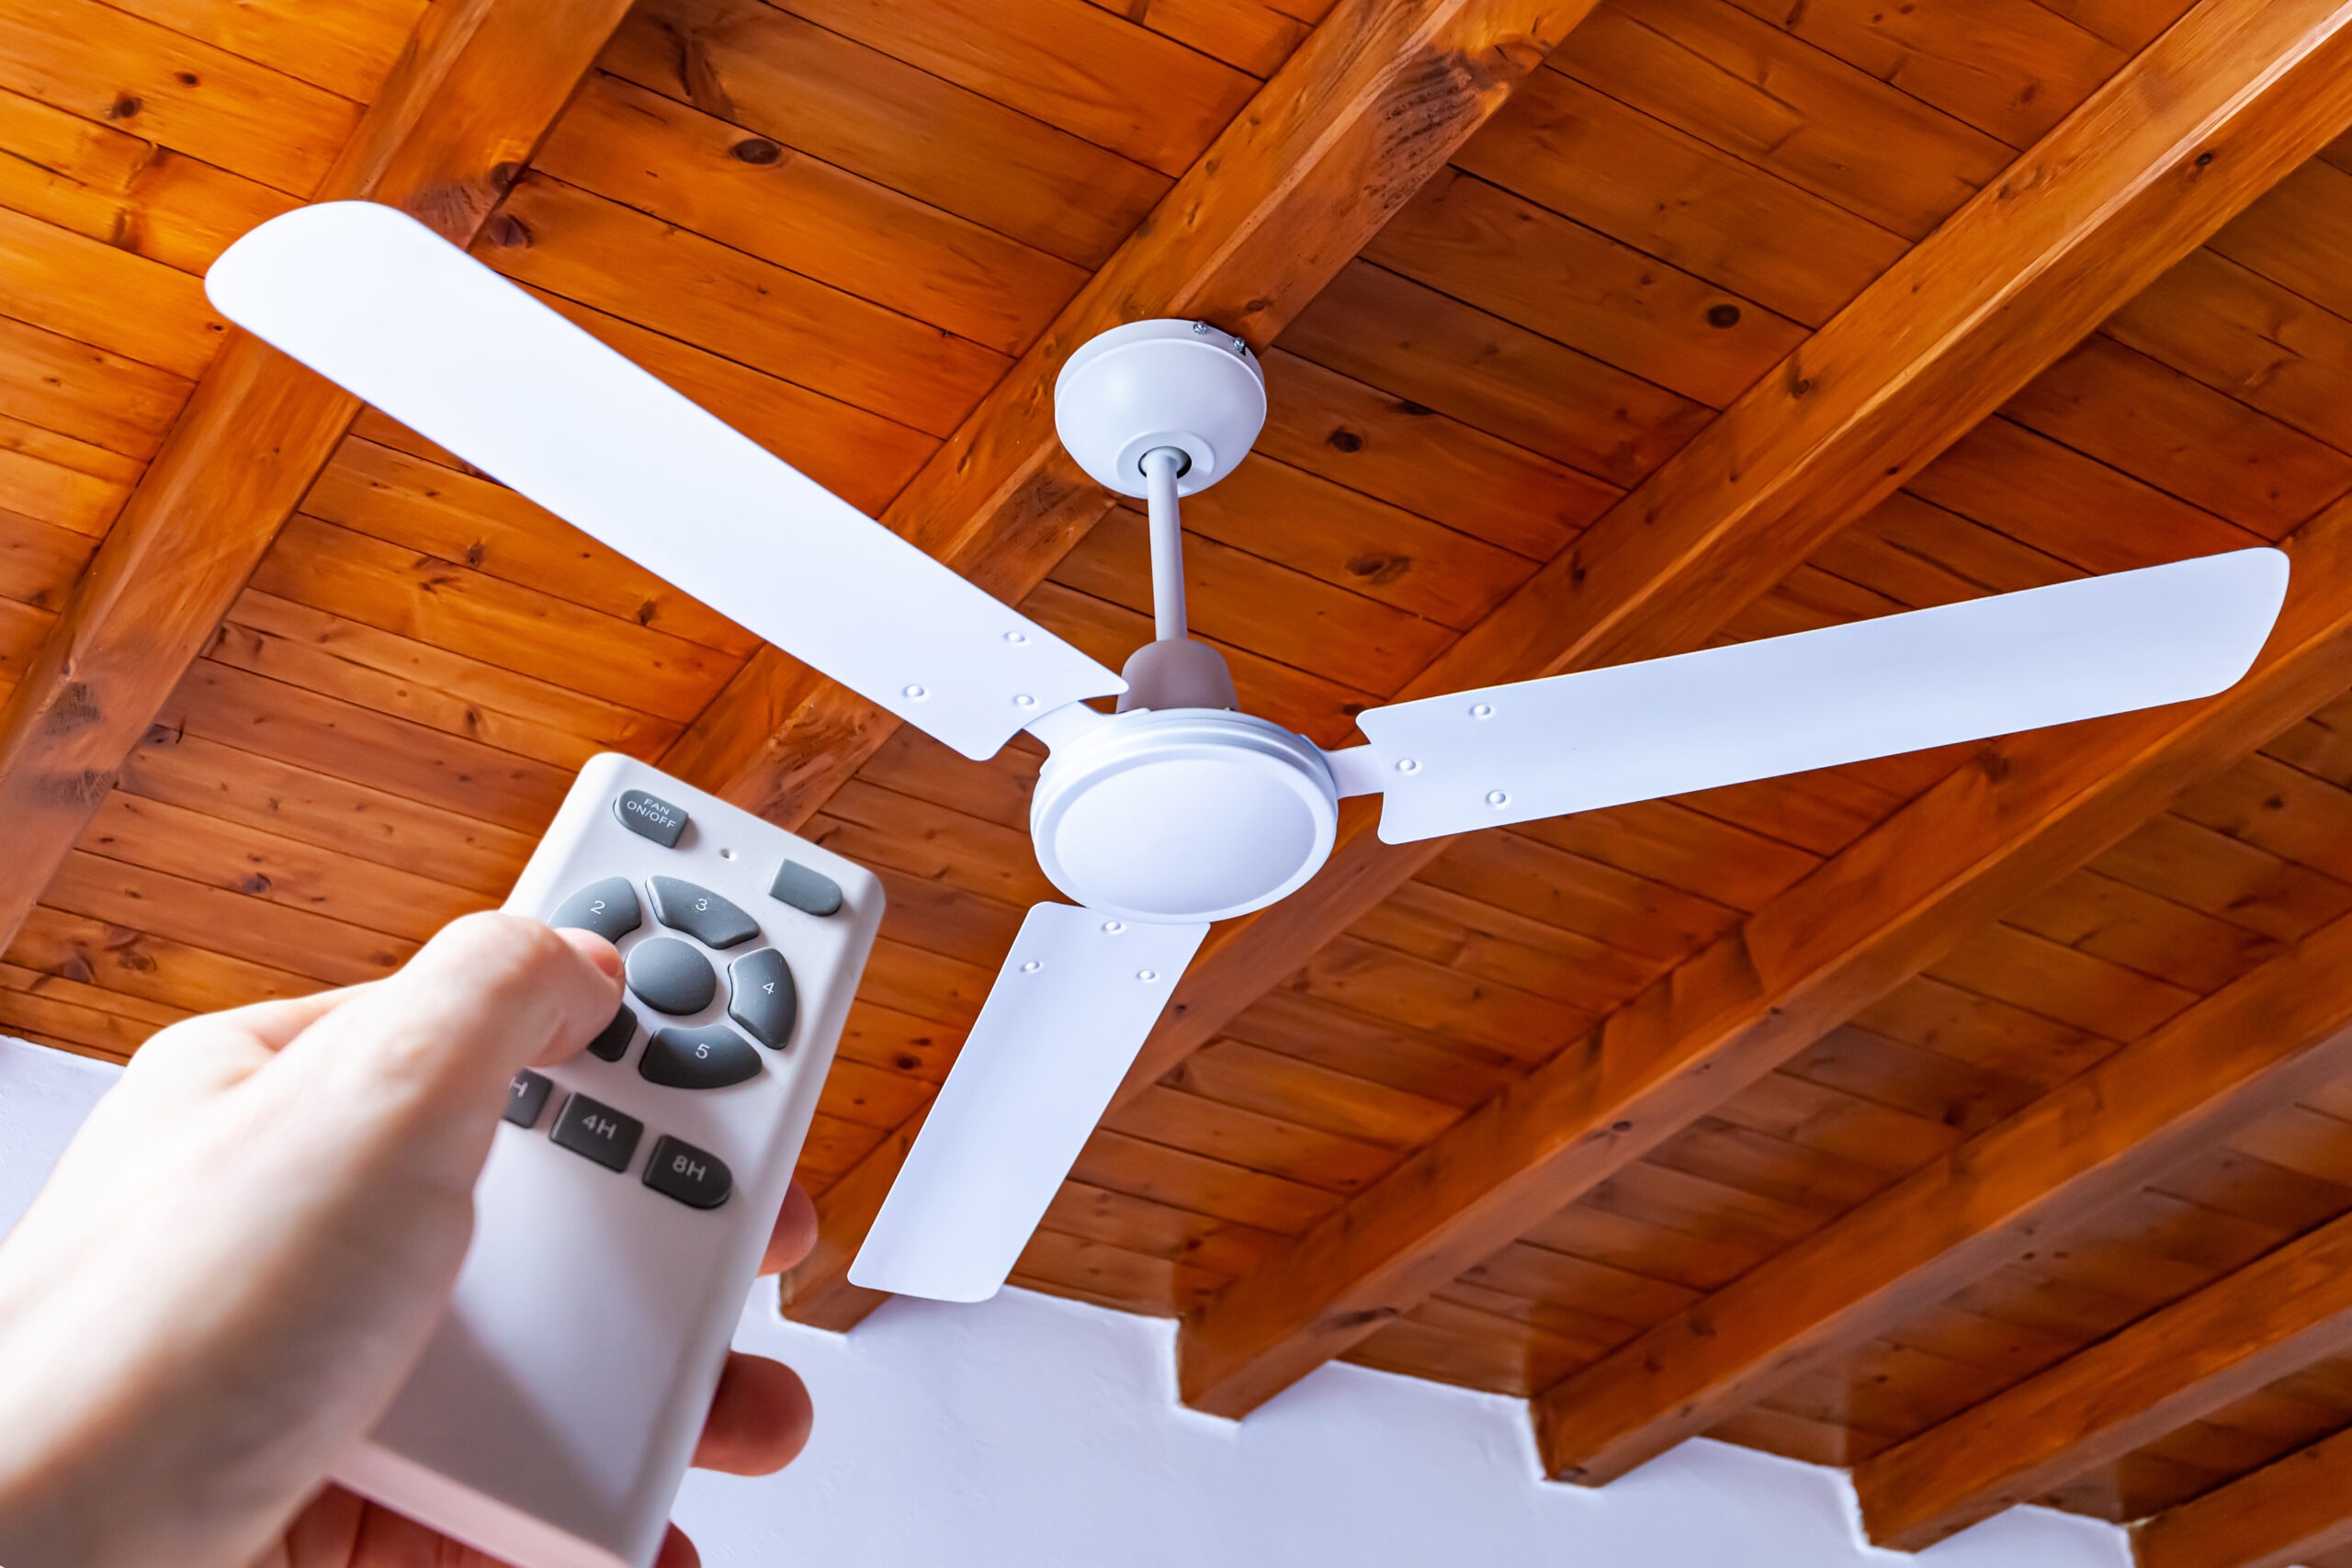 A man uses a remote control to turn on a white ceiling fan mounted in a house with wooden ceilings.